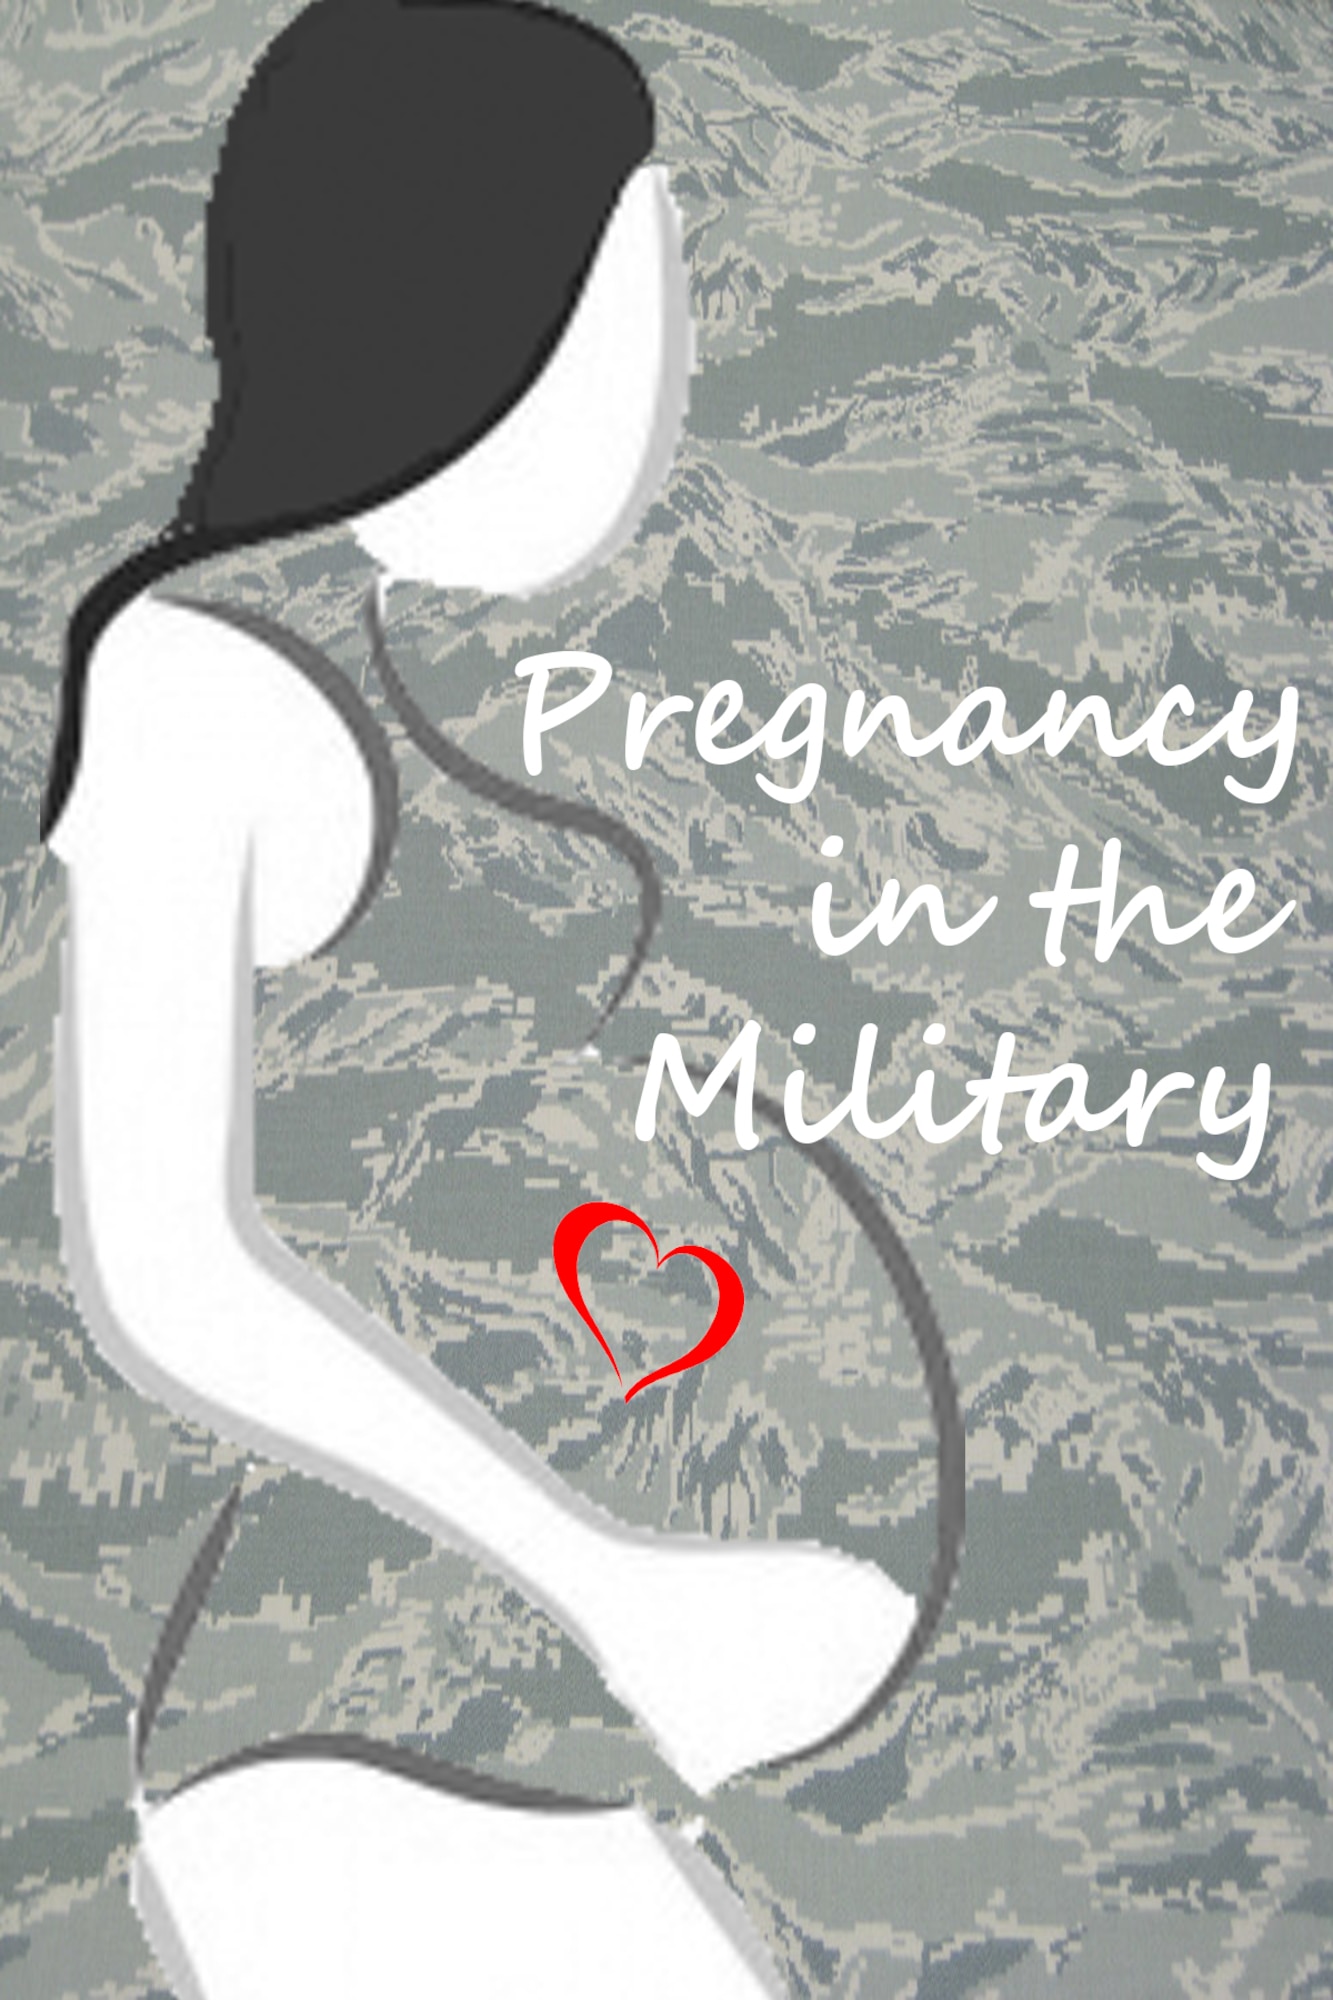 Pregnancy can be a blessing for those who don't experience morning sickness, back aches and swollen ankles, but for others it can be a nightmare experiencing these symptoms with full force. For those in the military there are many opportunities to understand pregnancy a bit better as well as having a support system for any concerns or questions that may arise. On Maxwell AFB, pregnant women both active duty and dependent can take advantage of the New Parent Support Program, which provides new parents with classes, home visits and 24-hour access to a nurse. (U.S. Air Force graphic/Senior Airman Tammie Ramsouer)